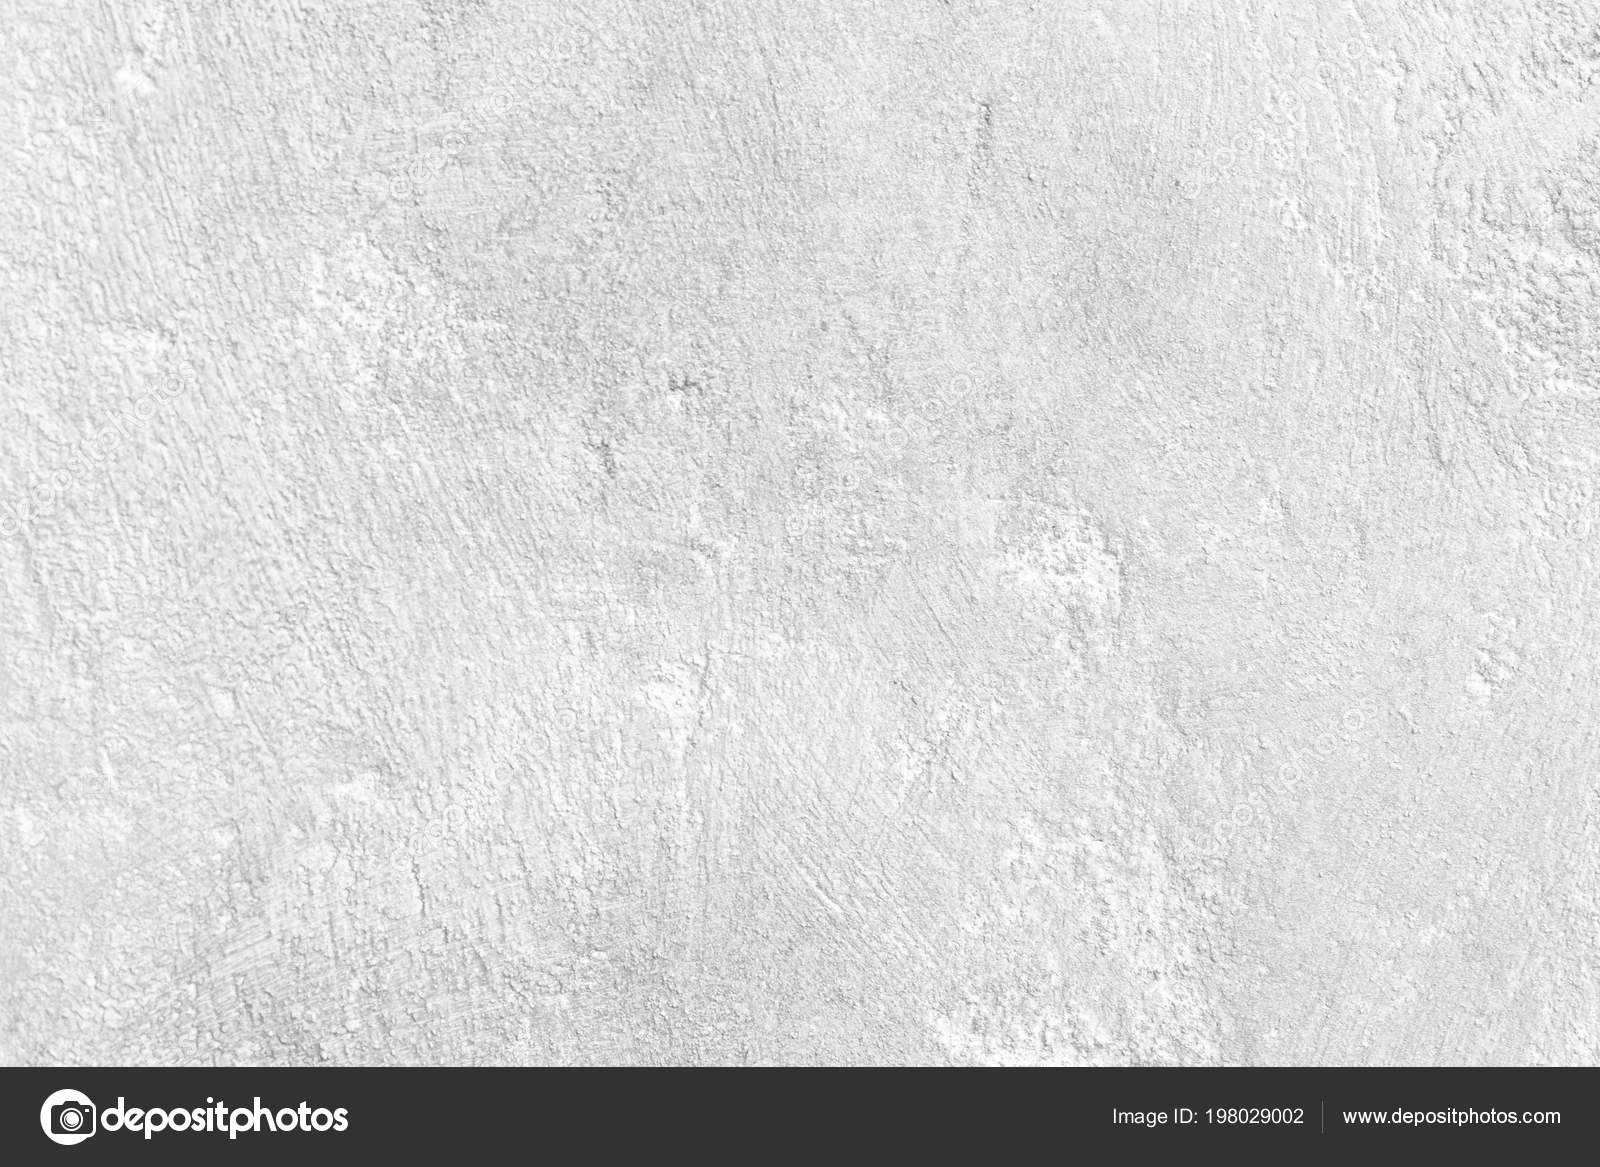 Black White Marble Patterned Texture Background Stock Photo by ...